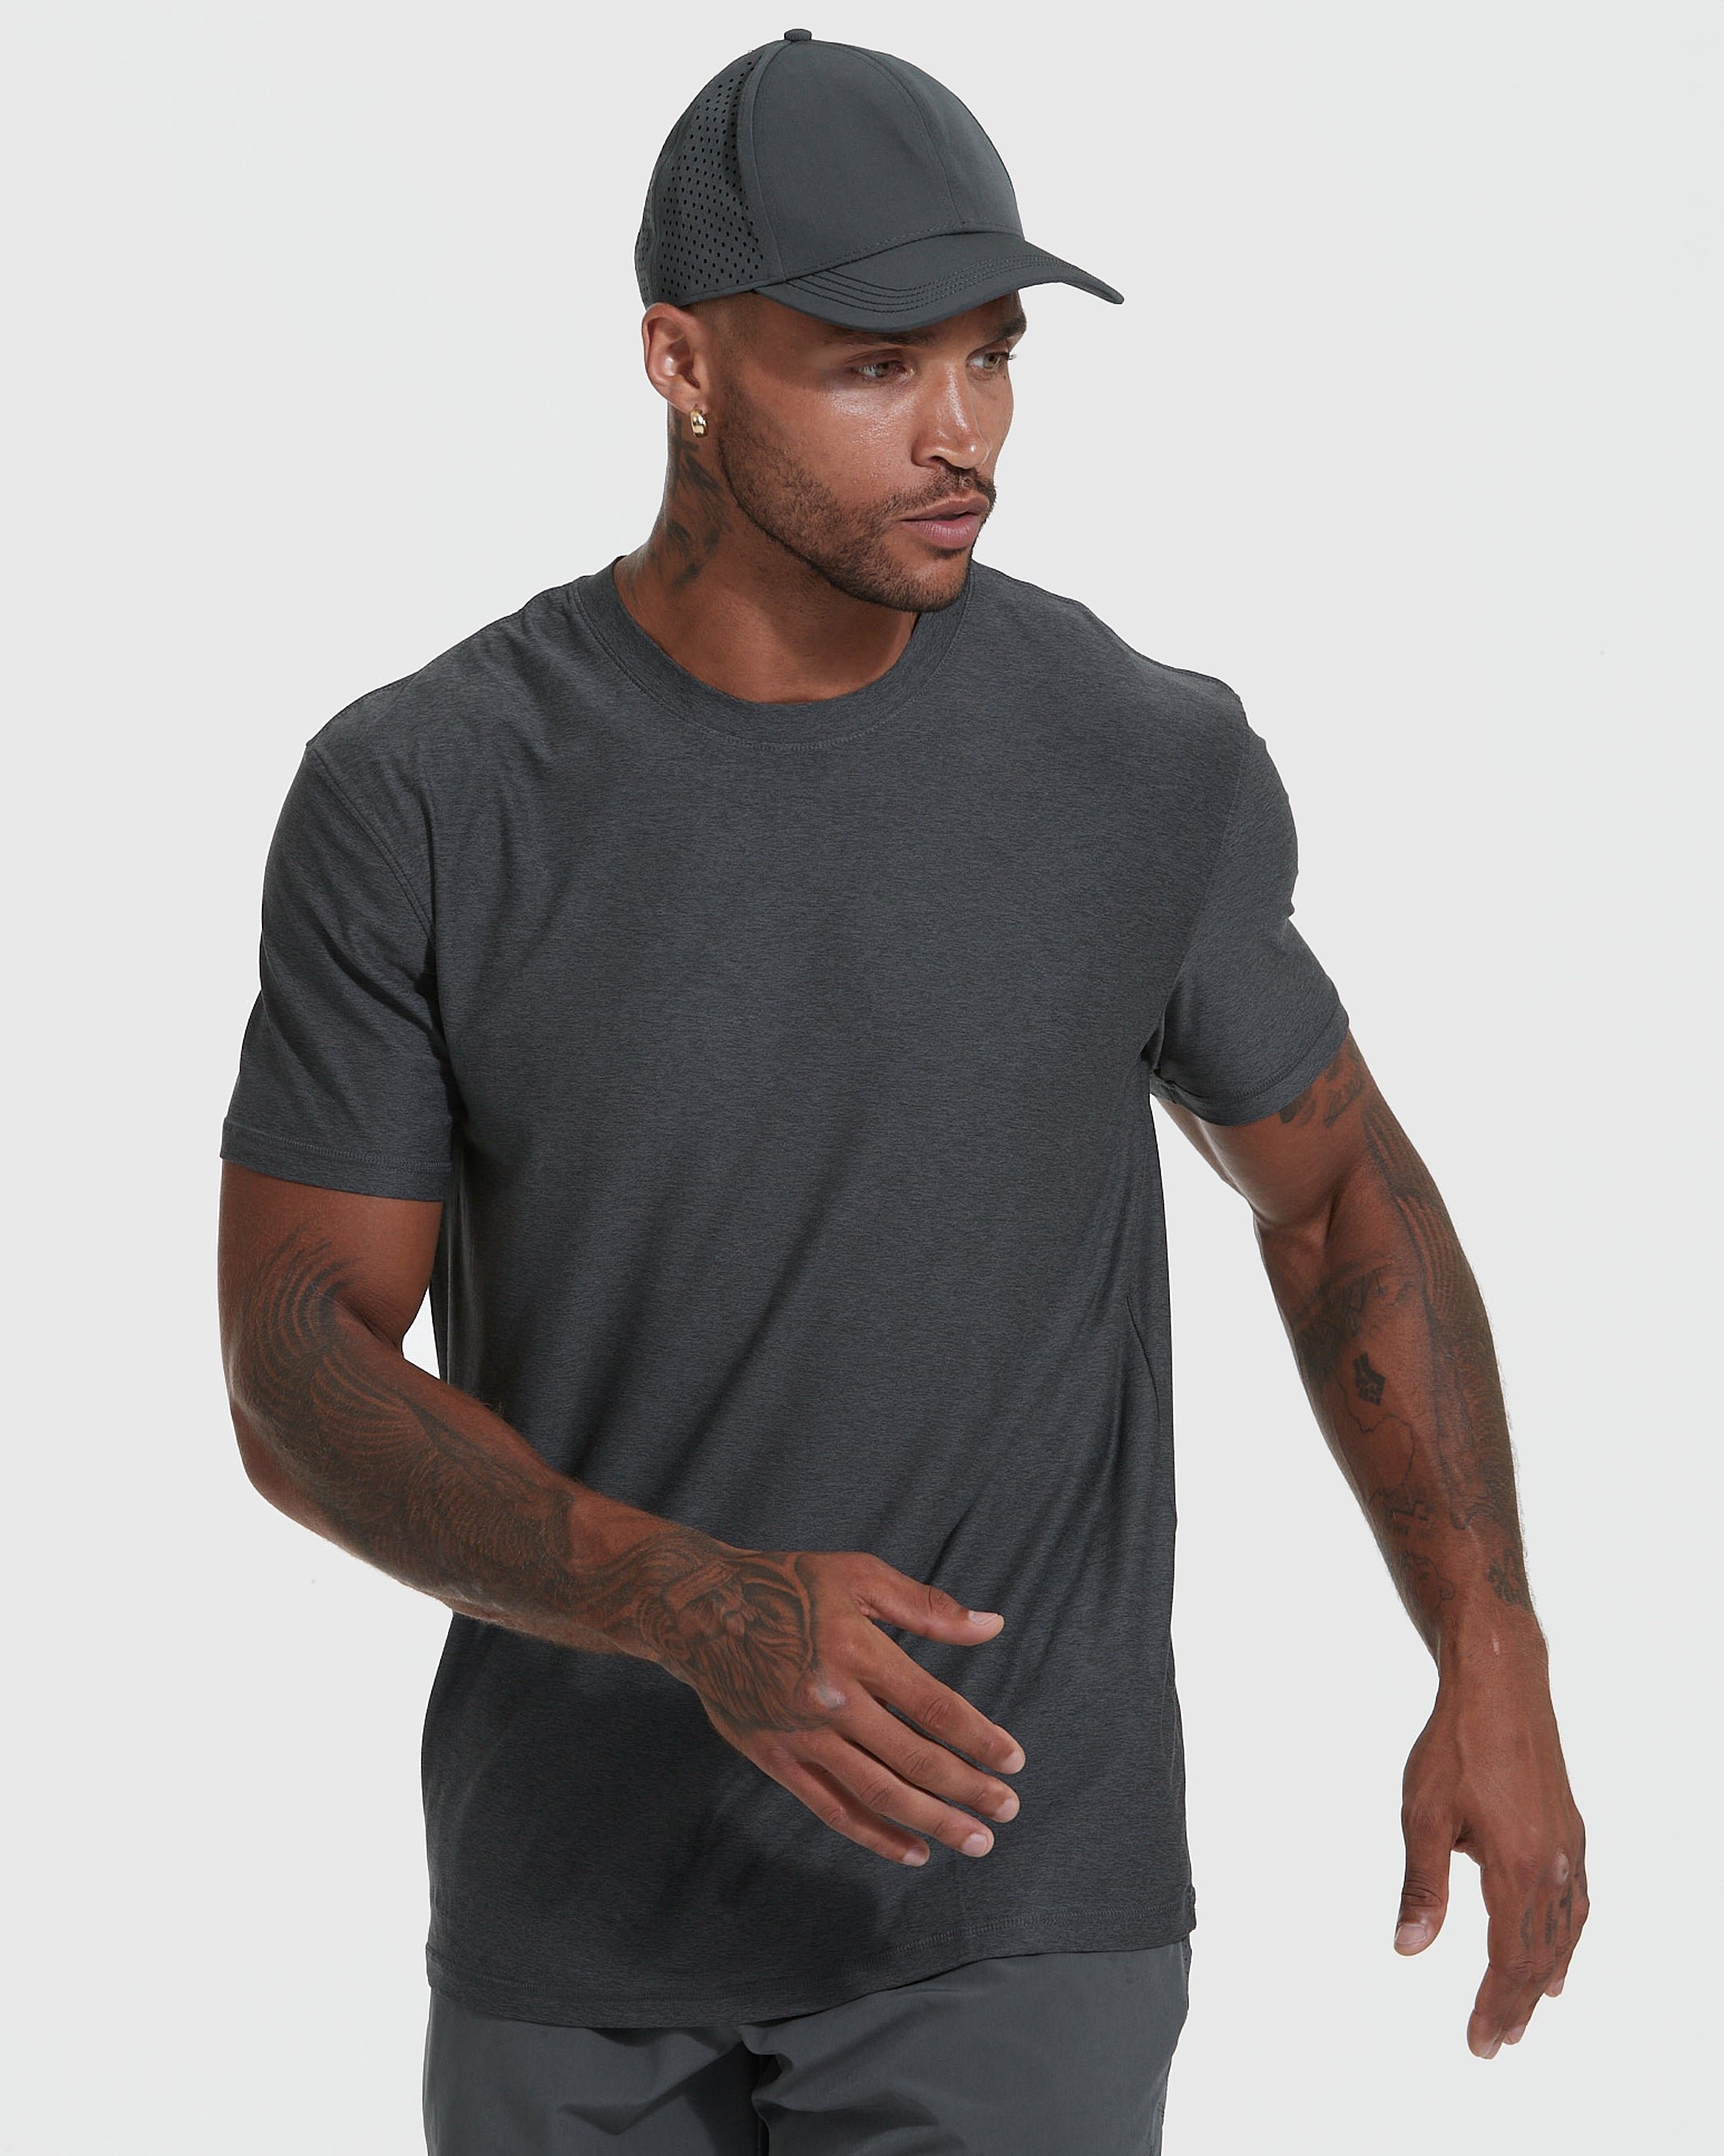 Charcoal Heather Gray Active Crew Neck T-Shirt